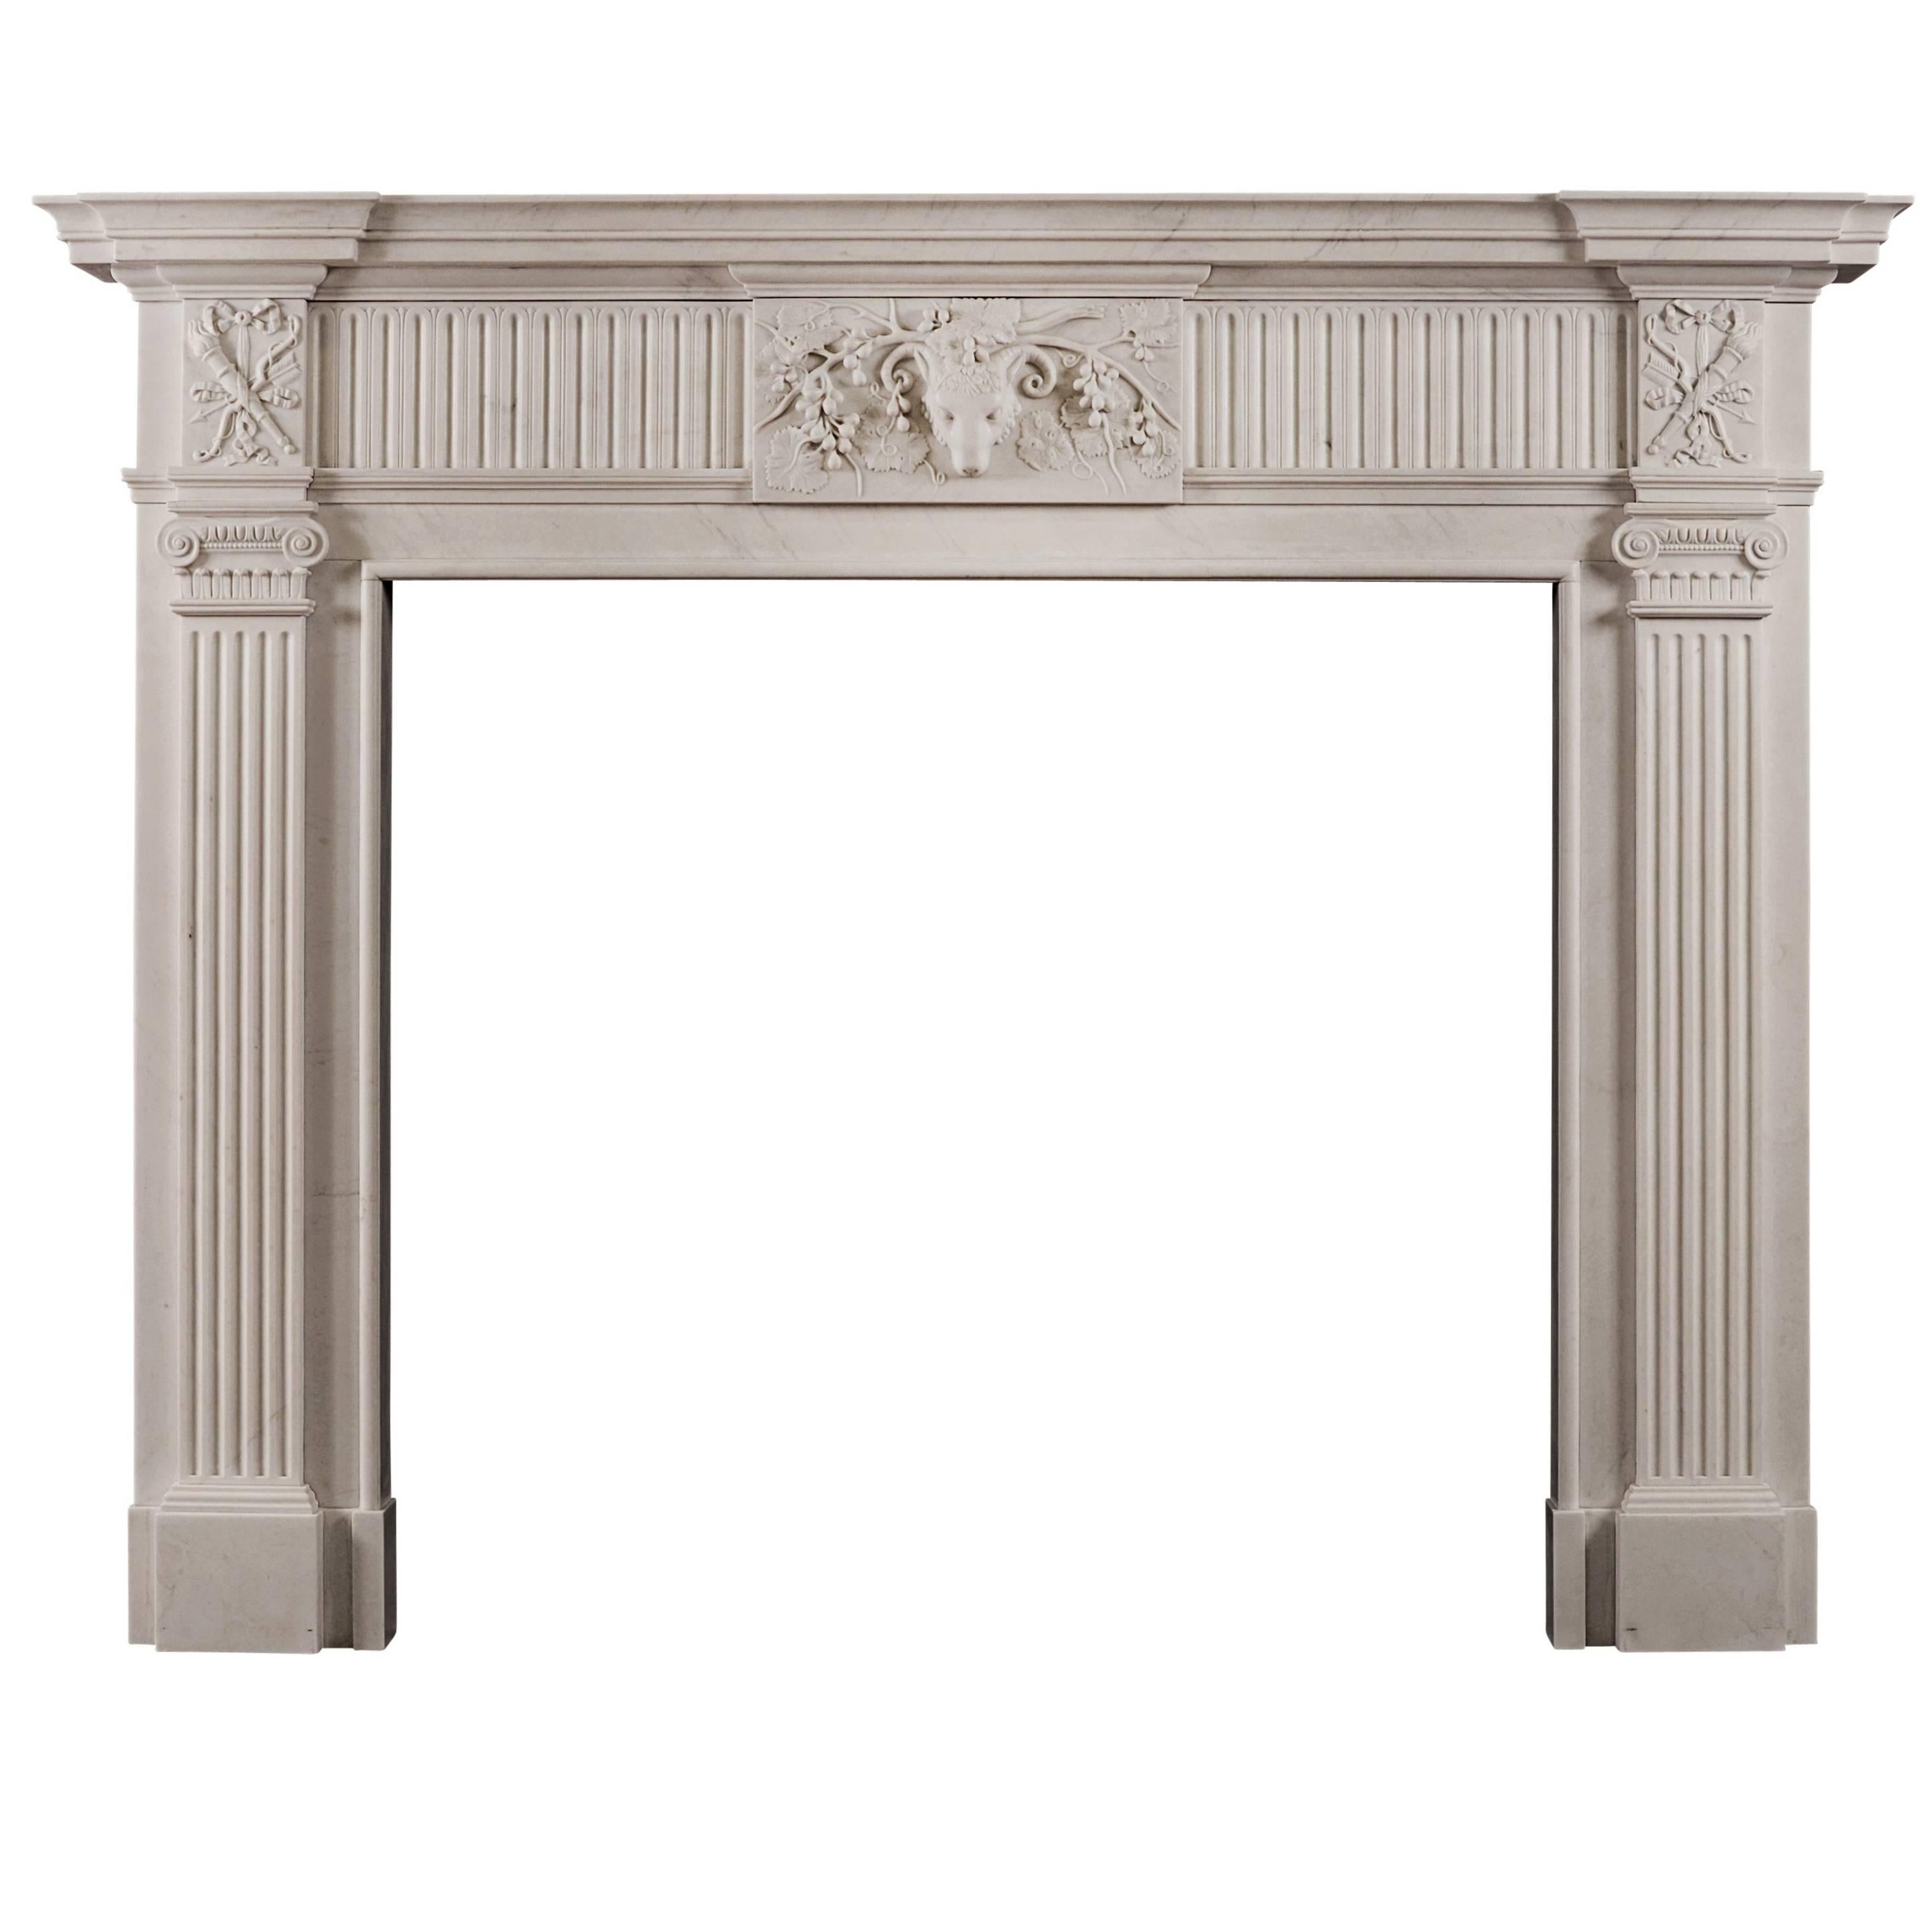 Georgian Style White Marble Chimneypiece with Rams Head to Centre Plaque